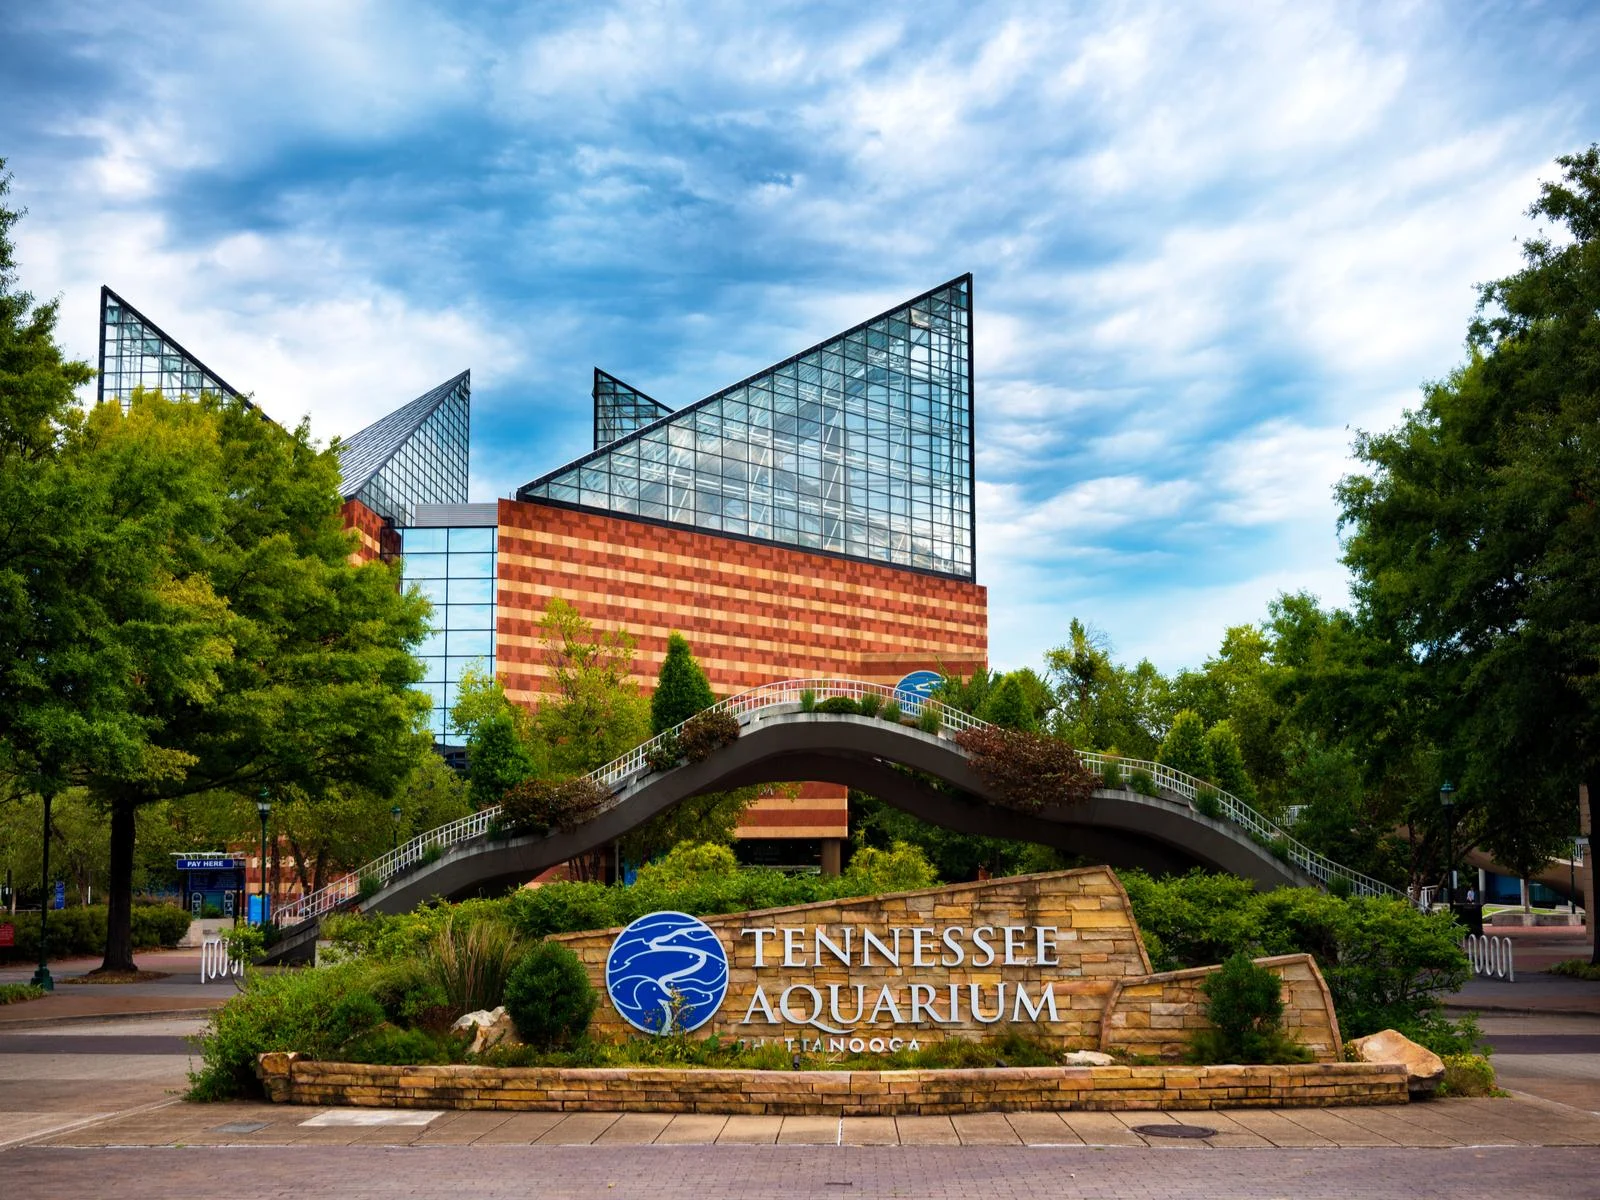 A display at the entrance of Tennessee Aquarium, one of the best aquariums in the US, with structures in the background with glass roofing